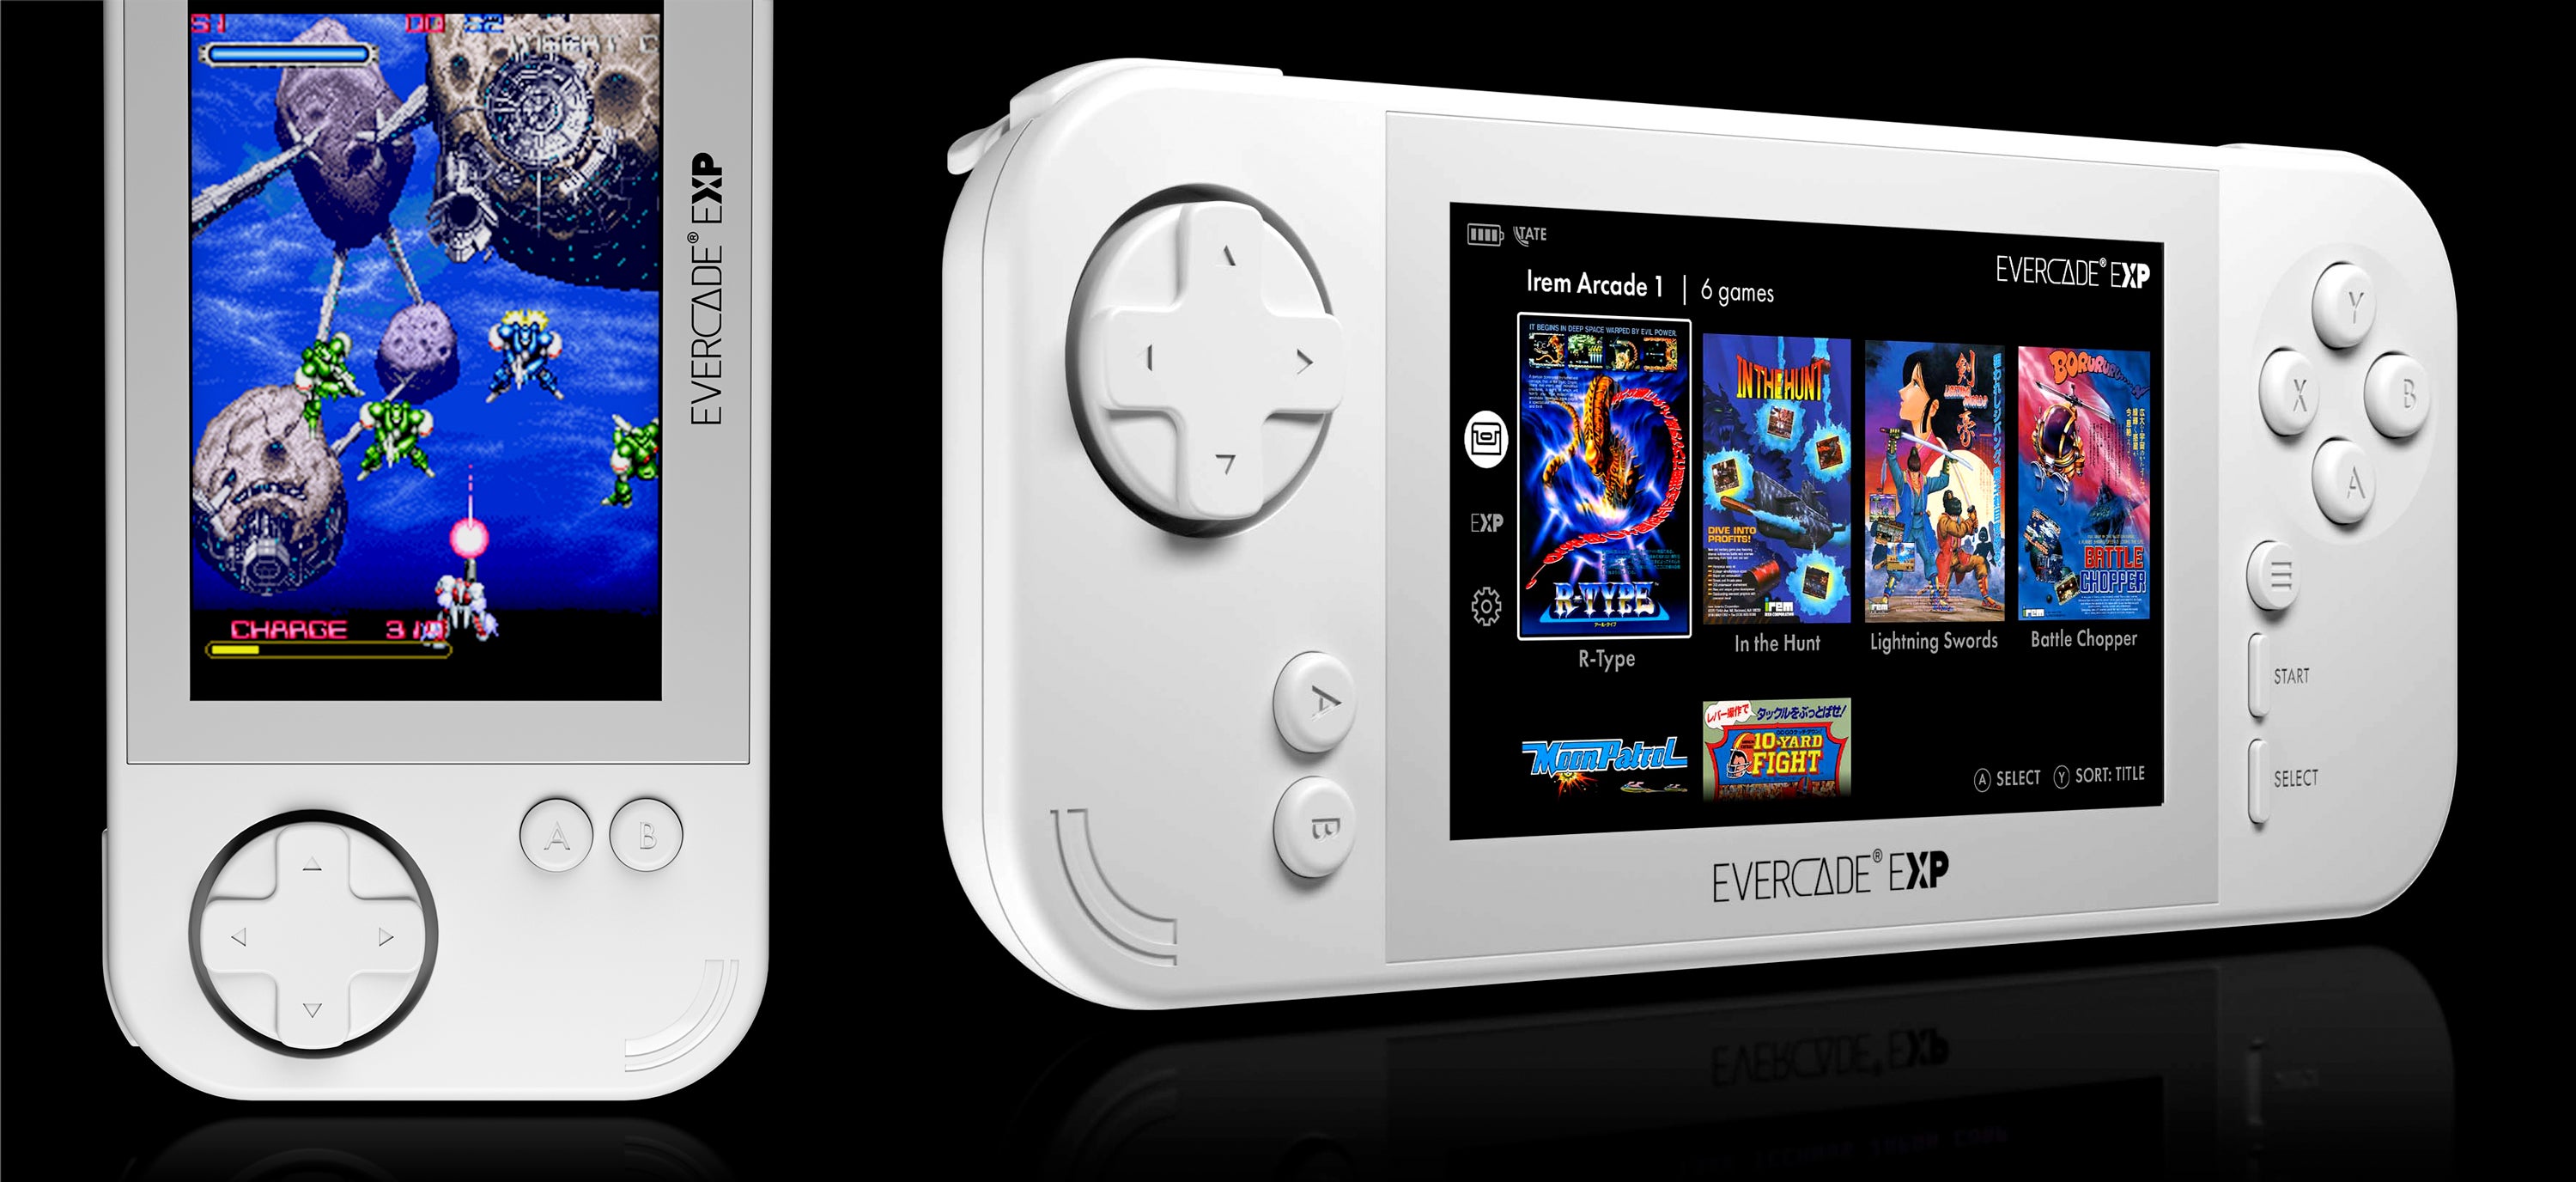 The Next Evercade Retro Arcade Handheld Is Getting Wi-Fi and a New Portrait Mode